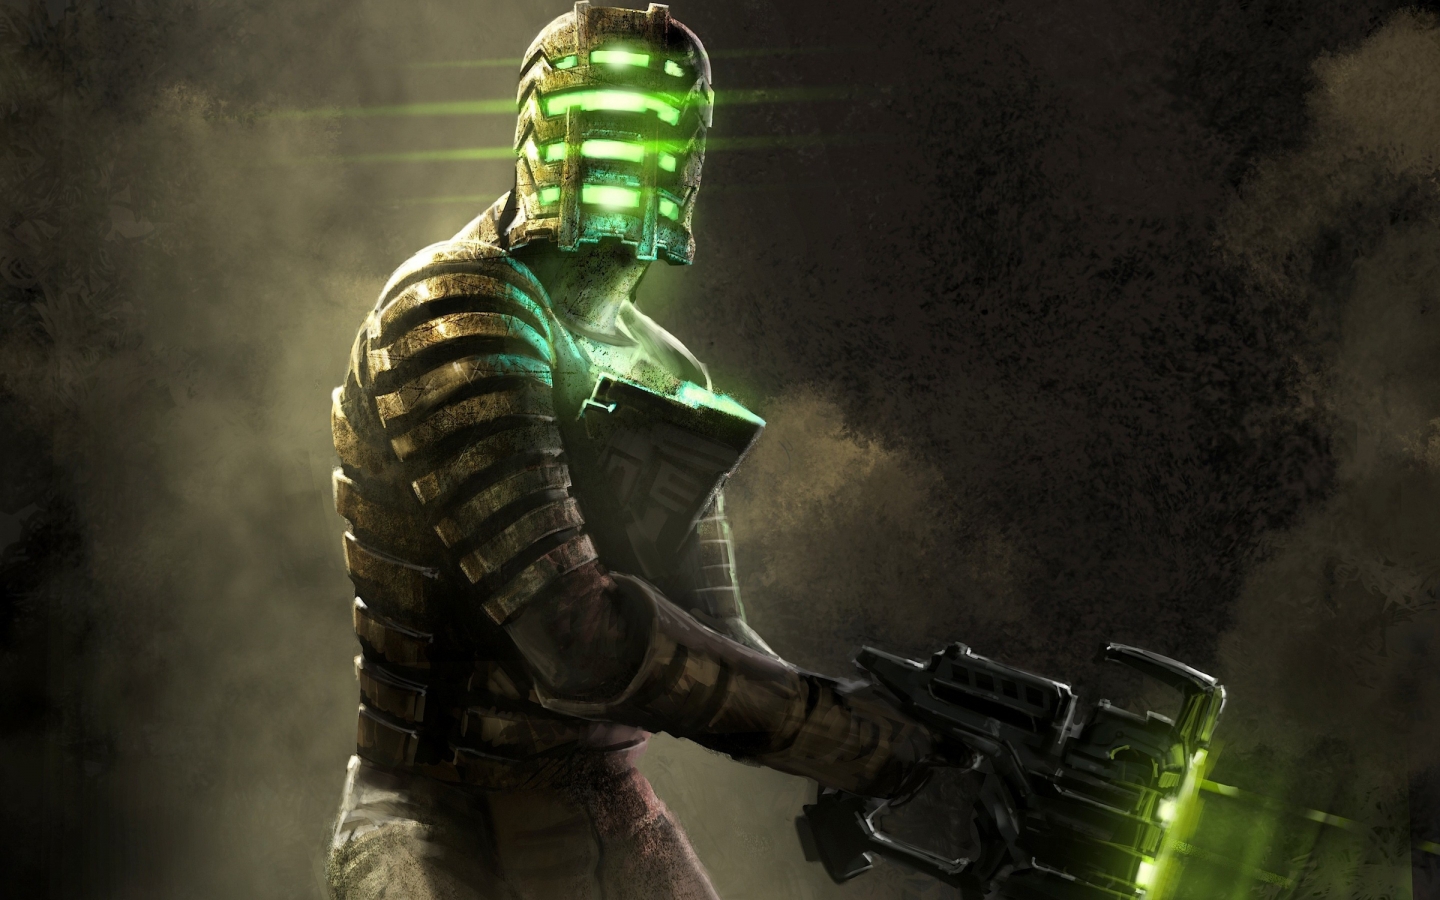 dead space 2 Art characters weapons 105389 3840x2400